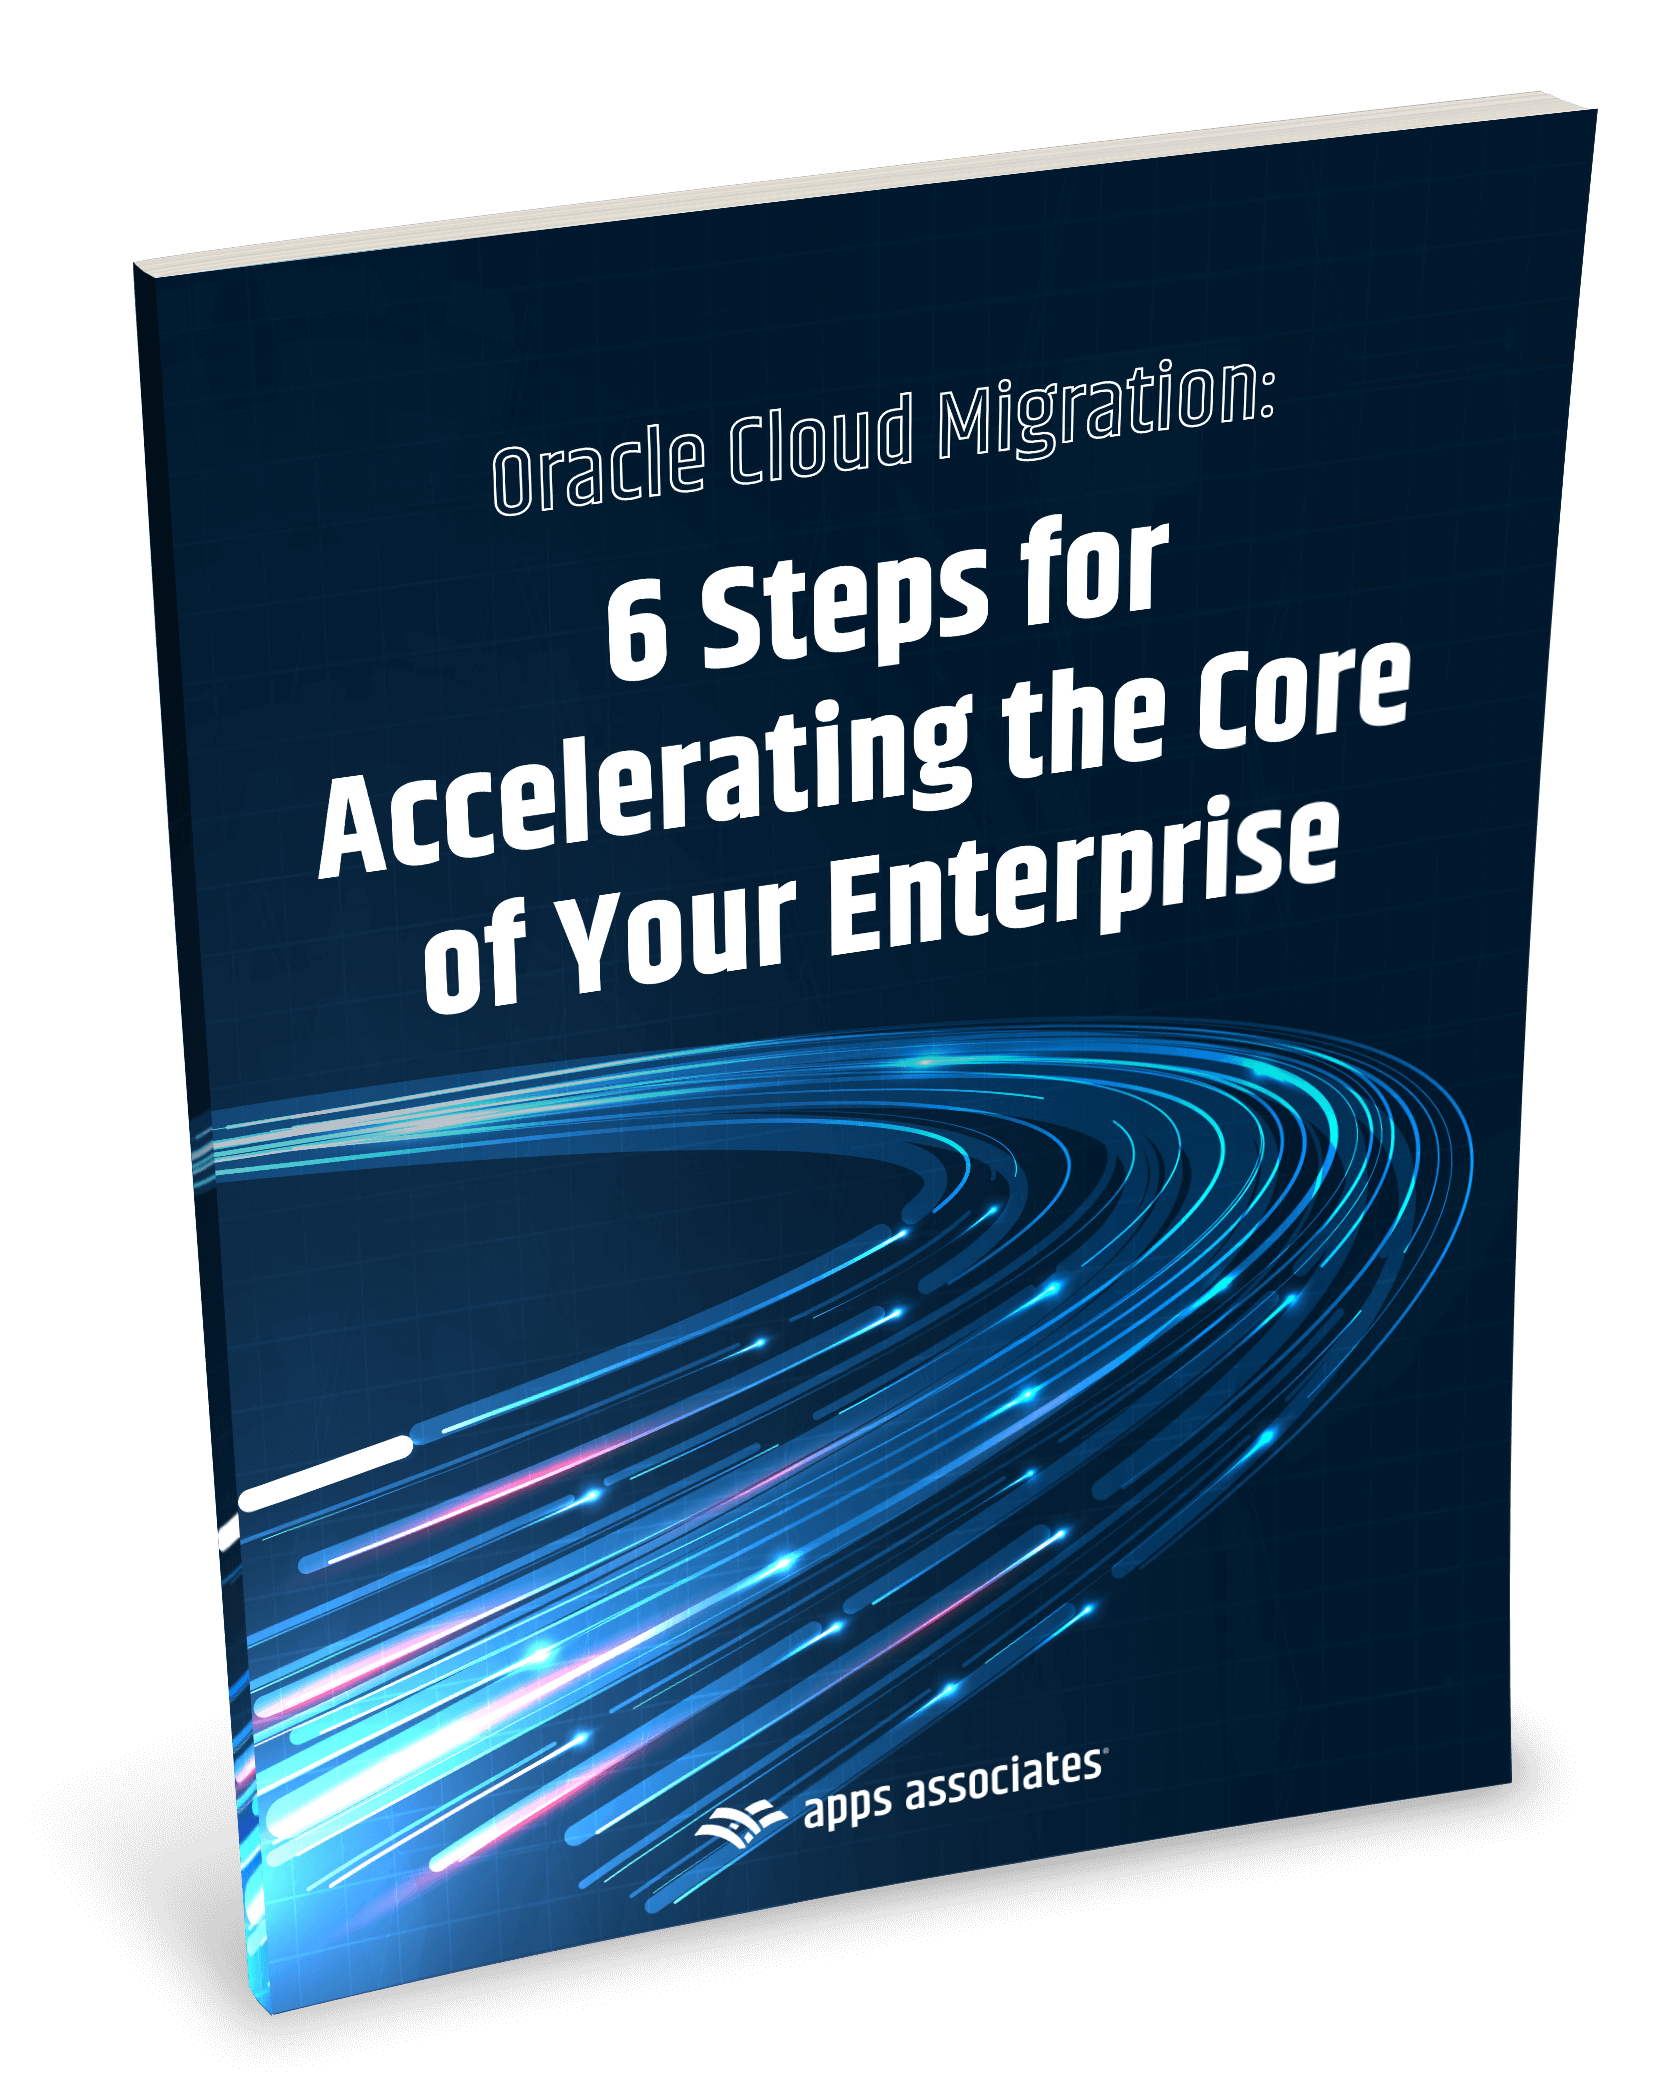 Oracle Cloud Migration: 6 Steps for Accelerating the Core of Your Enterprise